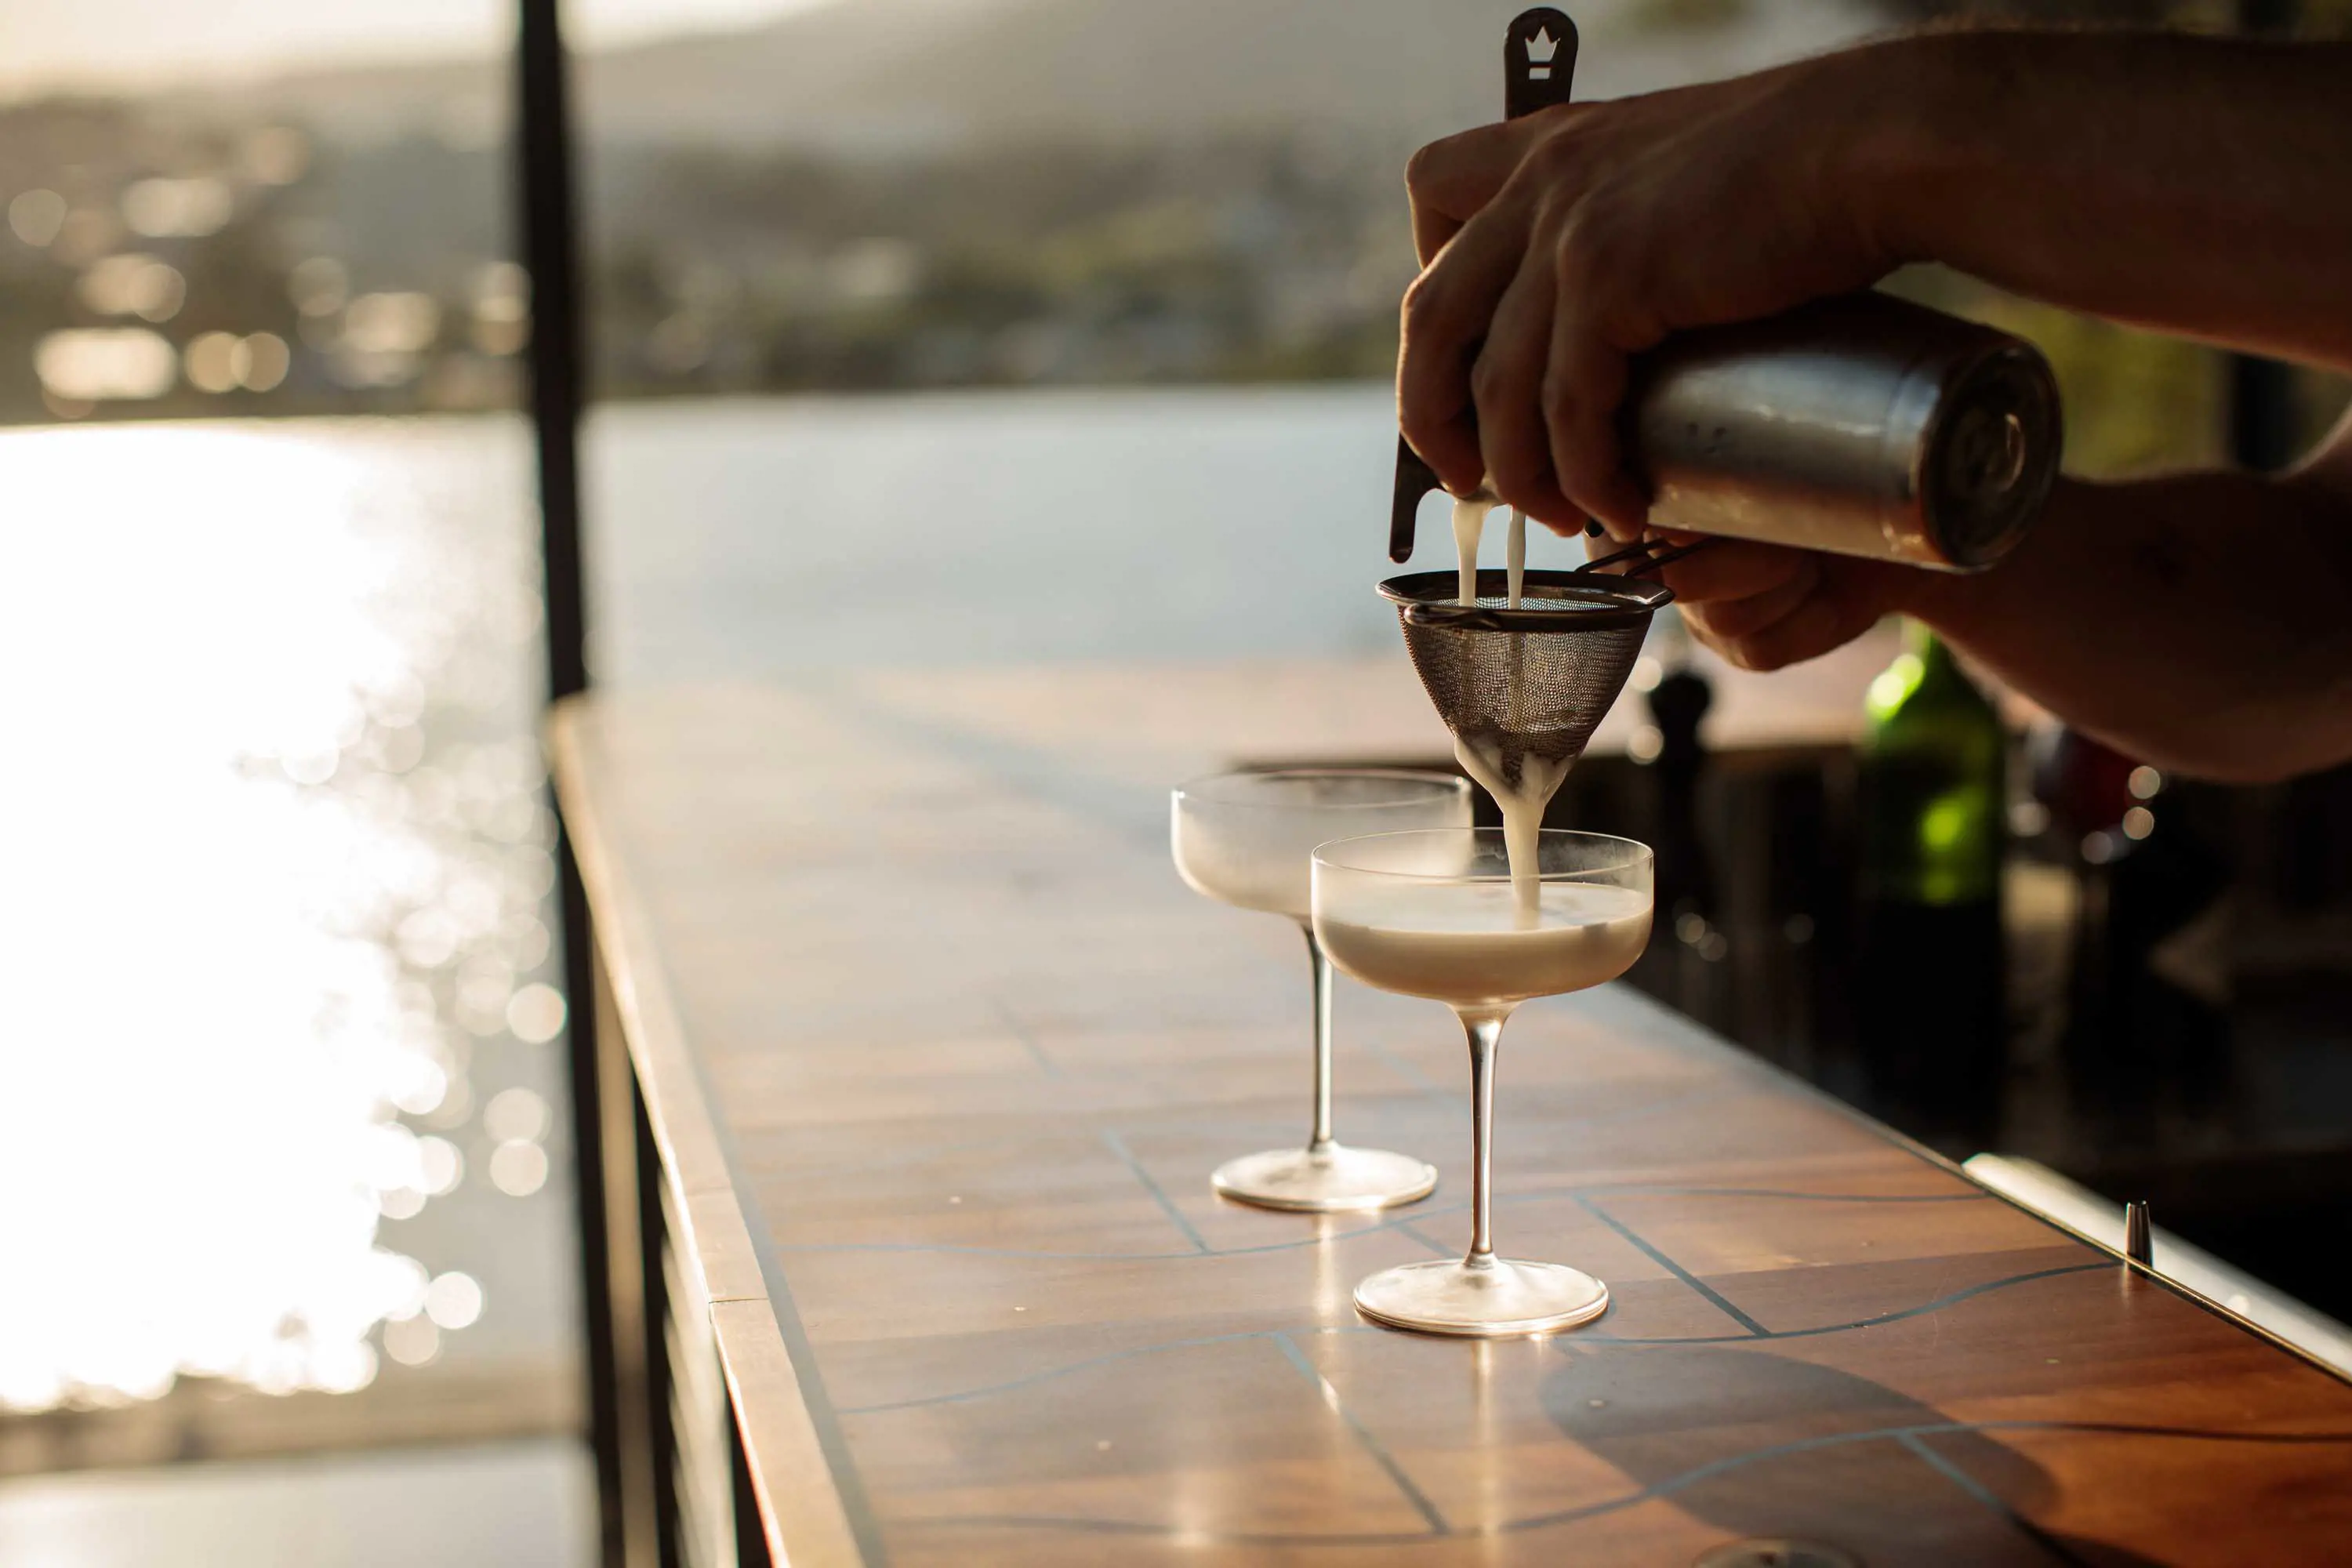 A bartender pours a cocktail through a strainer into a tall martini glass sitting on a wooden bar wit hviews of water in the background.